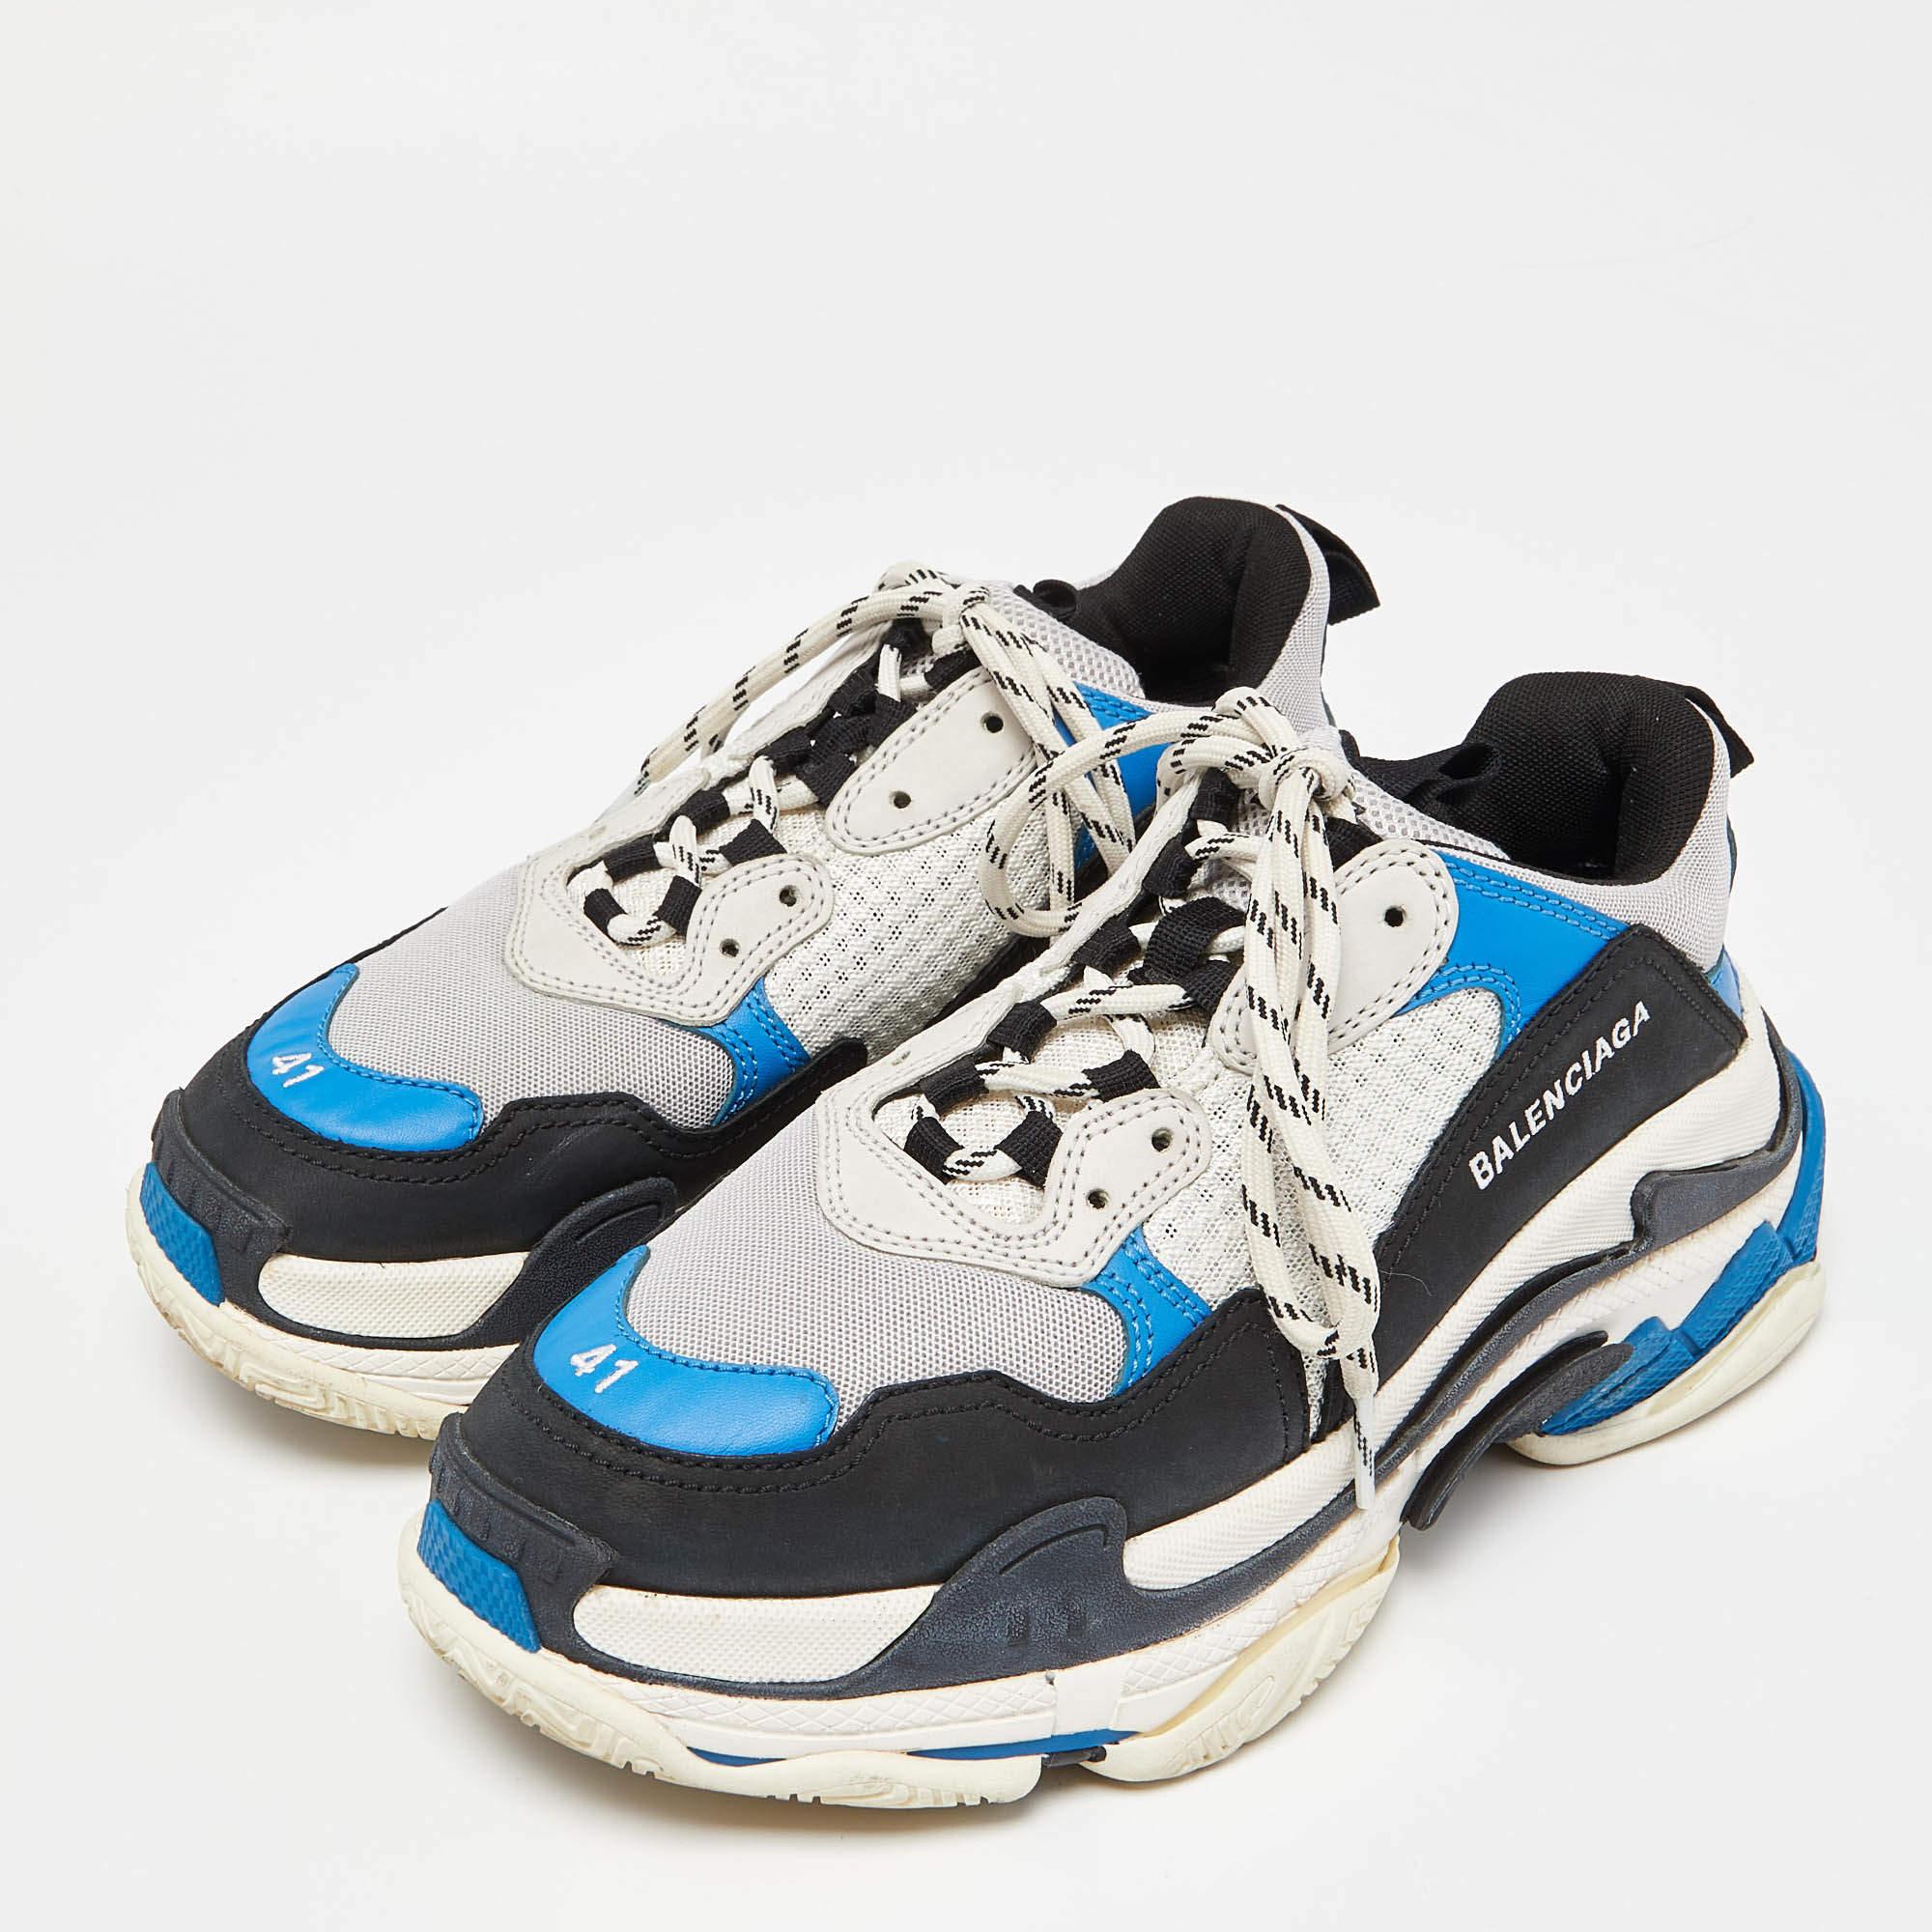 Balenciaga Tricolor Mesh and Leather Triple S Sneakers Size 41 1